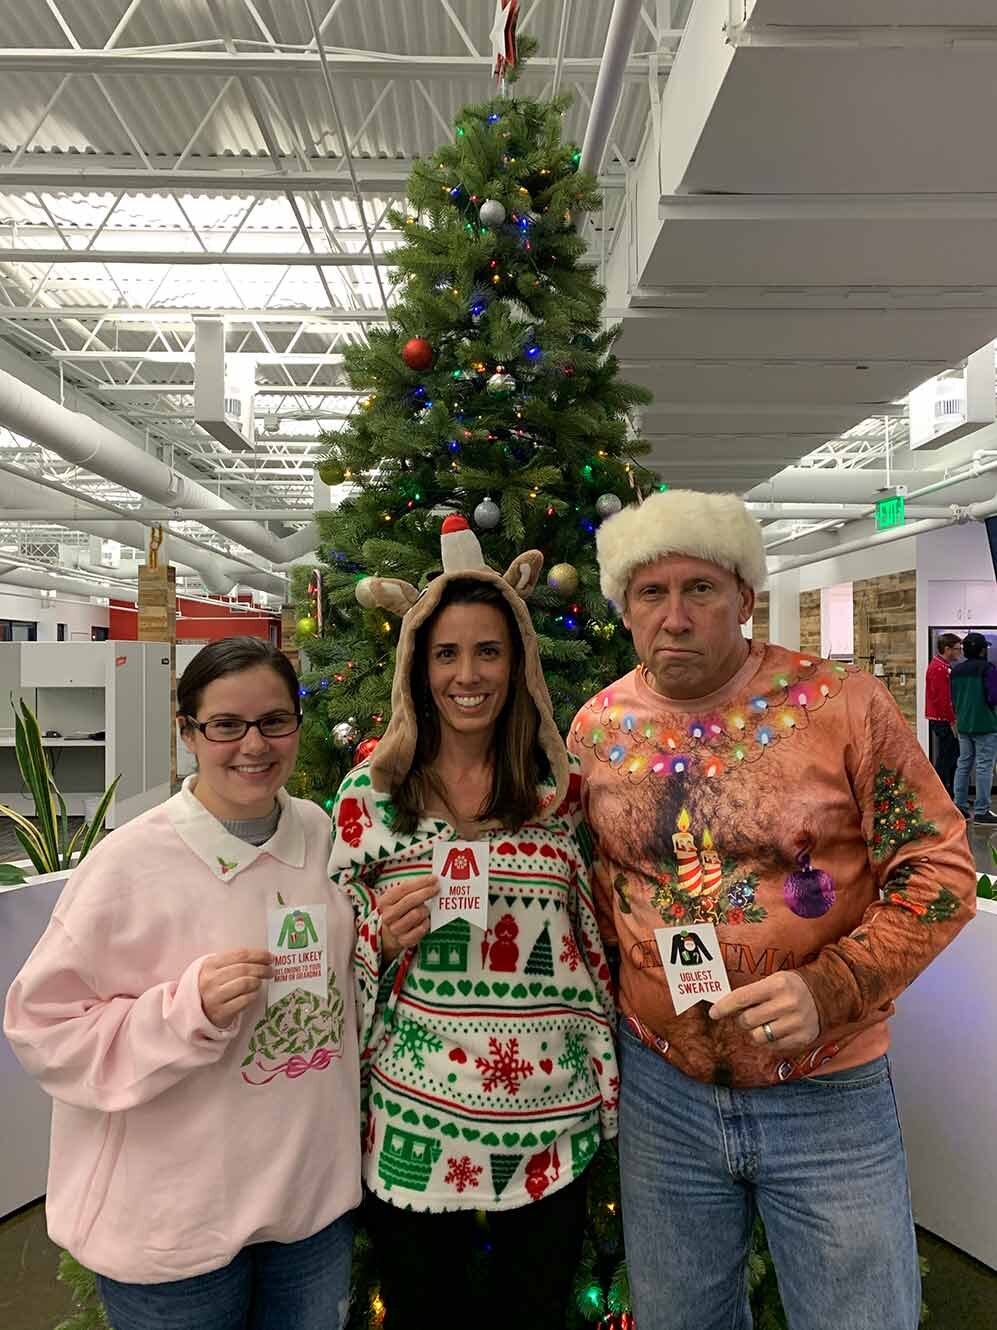 Congratulations to Our Ugly Christmas Sweater Contest Winners! 